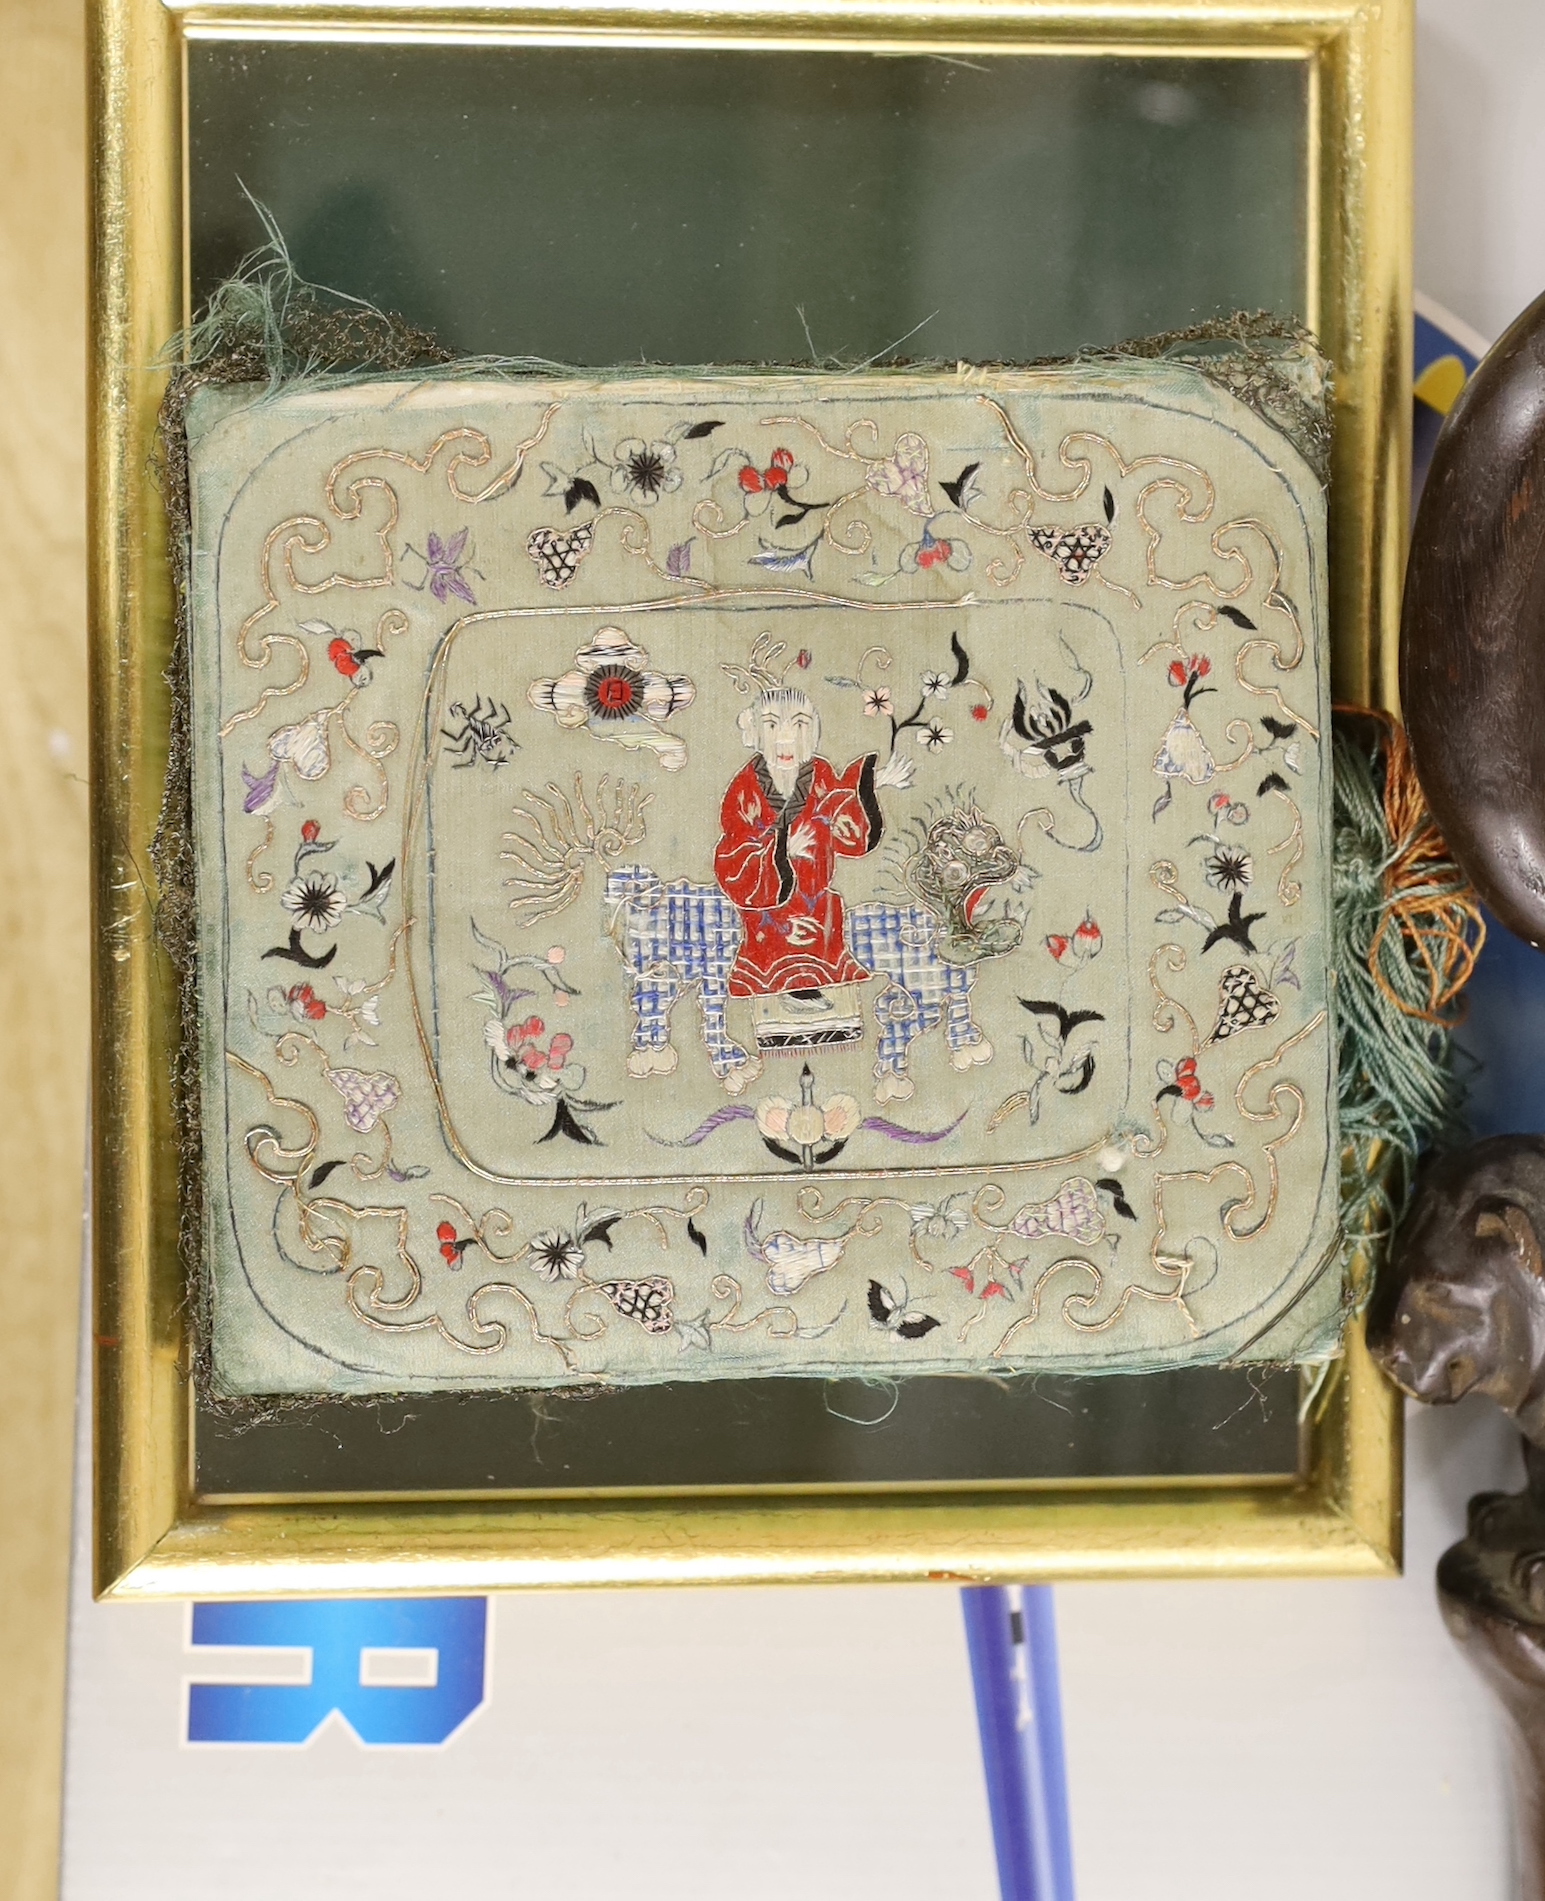 Six items, including an embroidered cap, embroidered box, framed gilt finals, a carved walking stick, a money box, and a diecast military aircraft